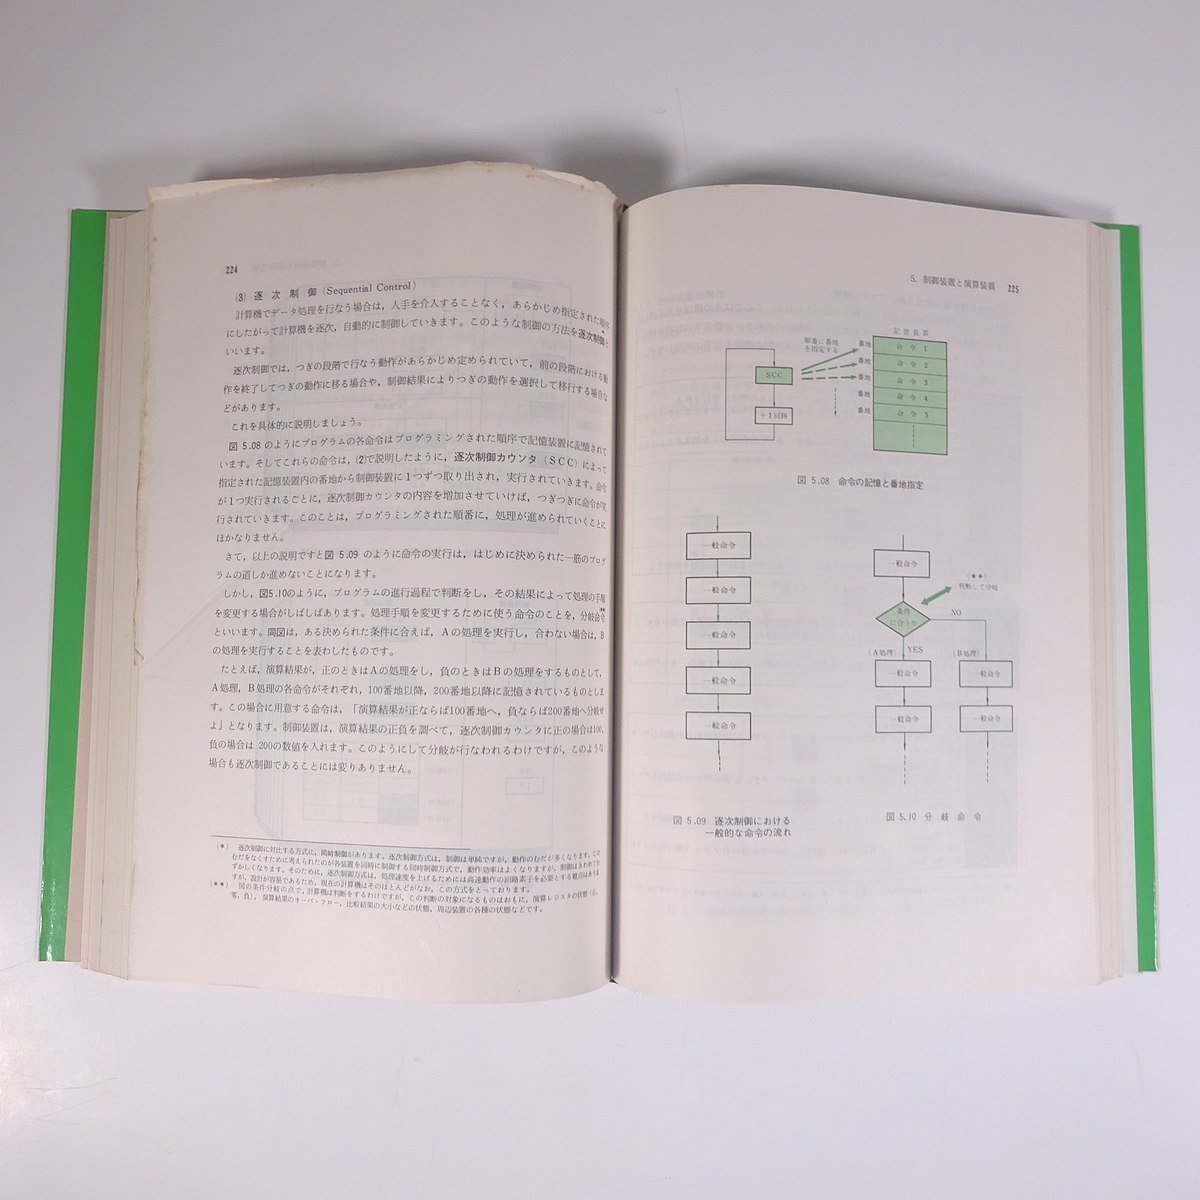  map opinion electron count machine NTT Japan electro- confidence telephone . company compilation electric communication association ohm company 1976. entering large book@PC personal computer microcomputer 